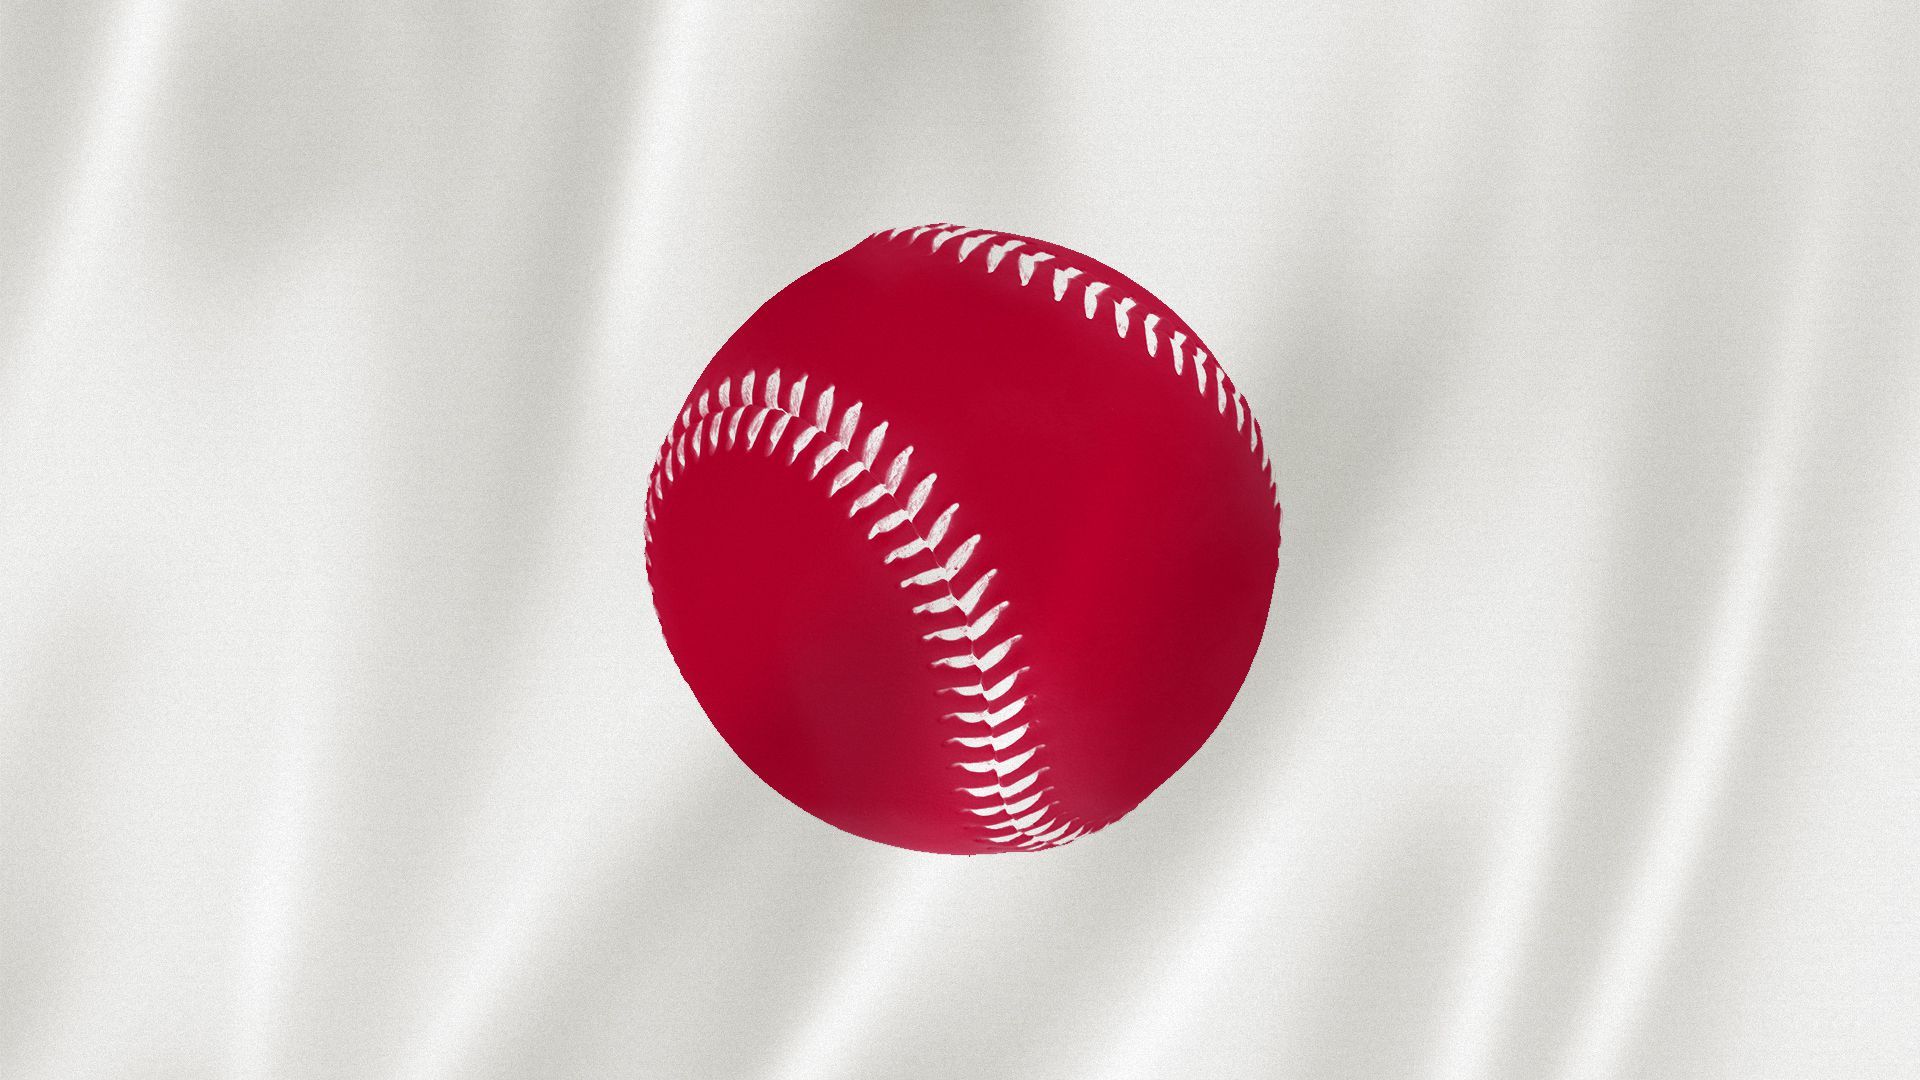 Illustration of the Japanese flag with a red baseball instead of circle